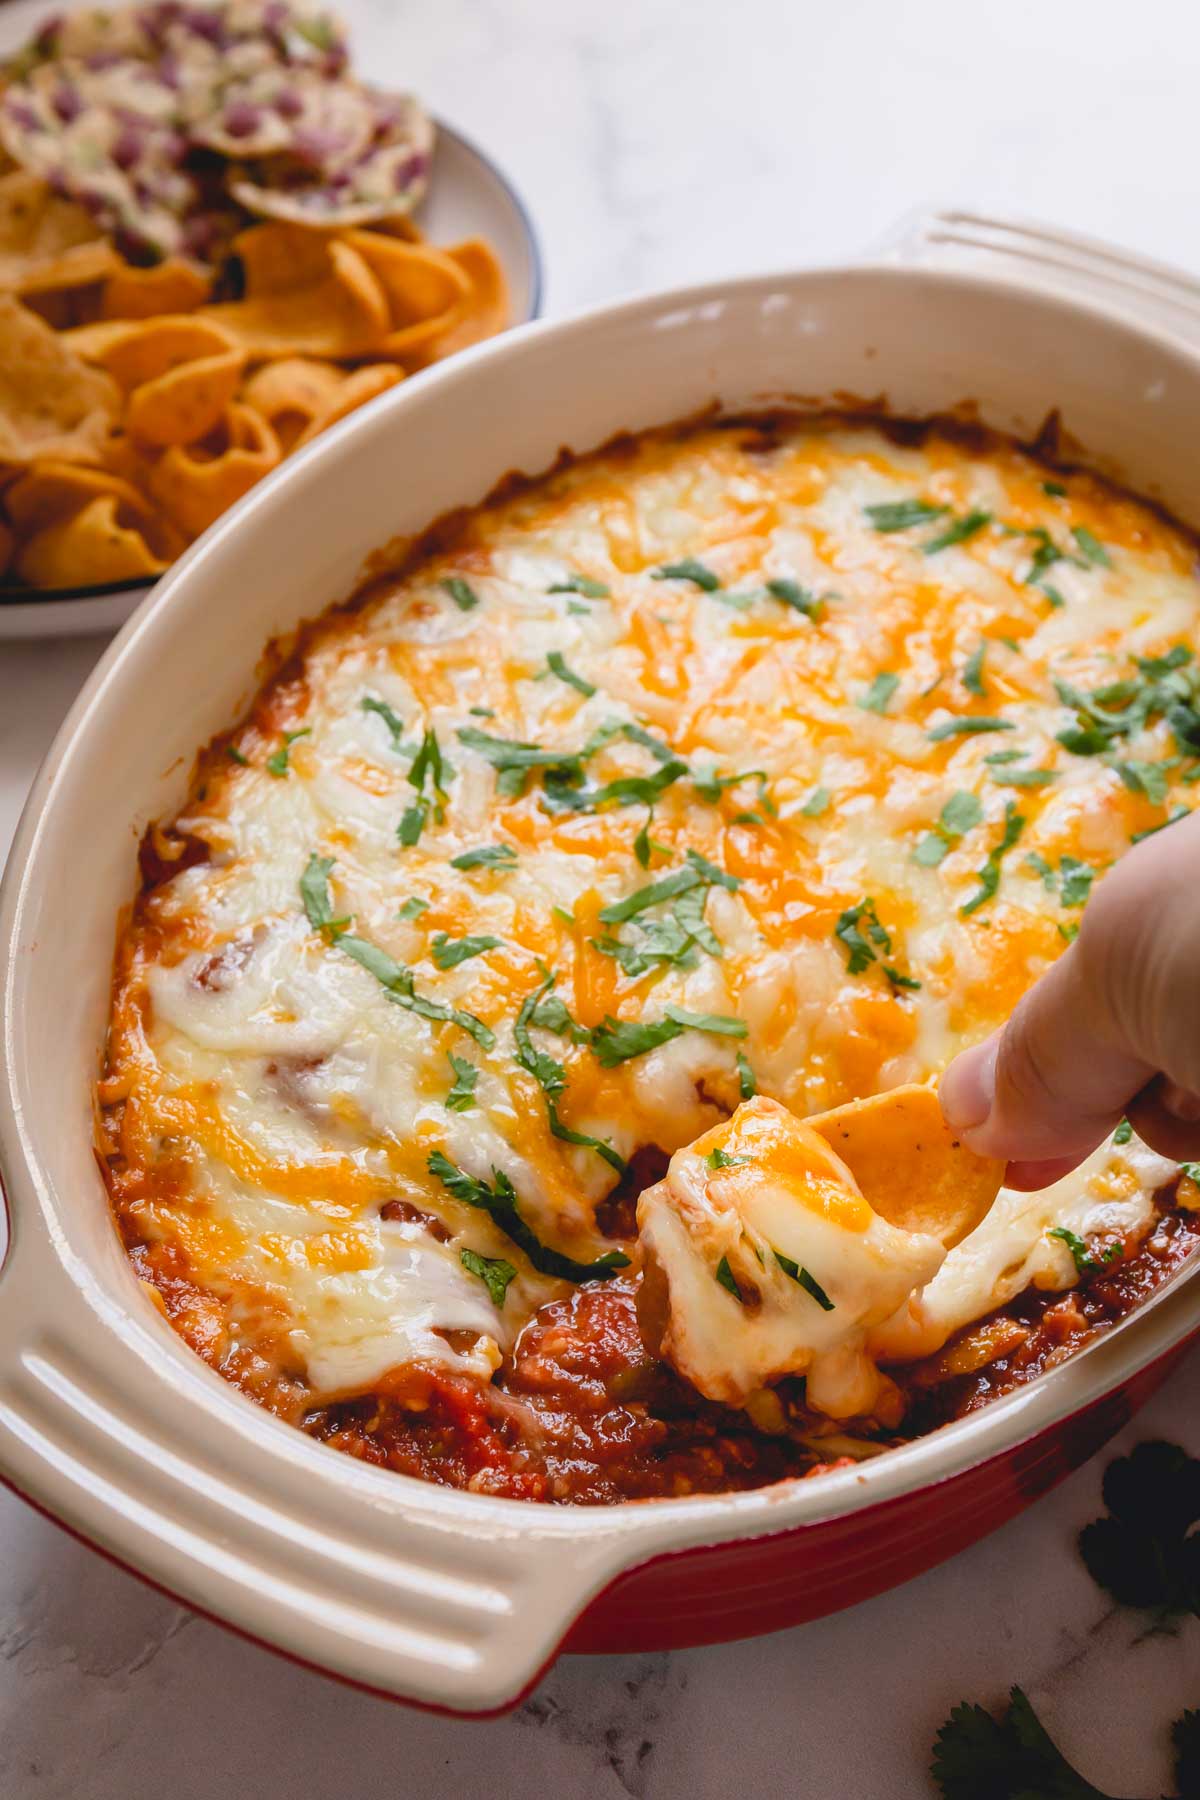 Bean dip in a casserole dish with a portion being scooped with a chip.